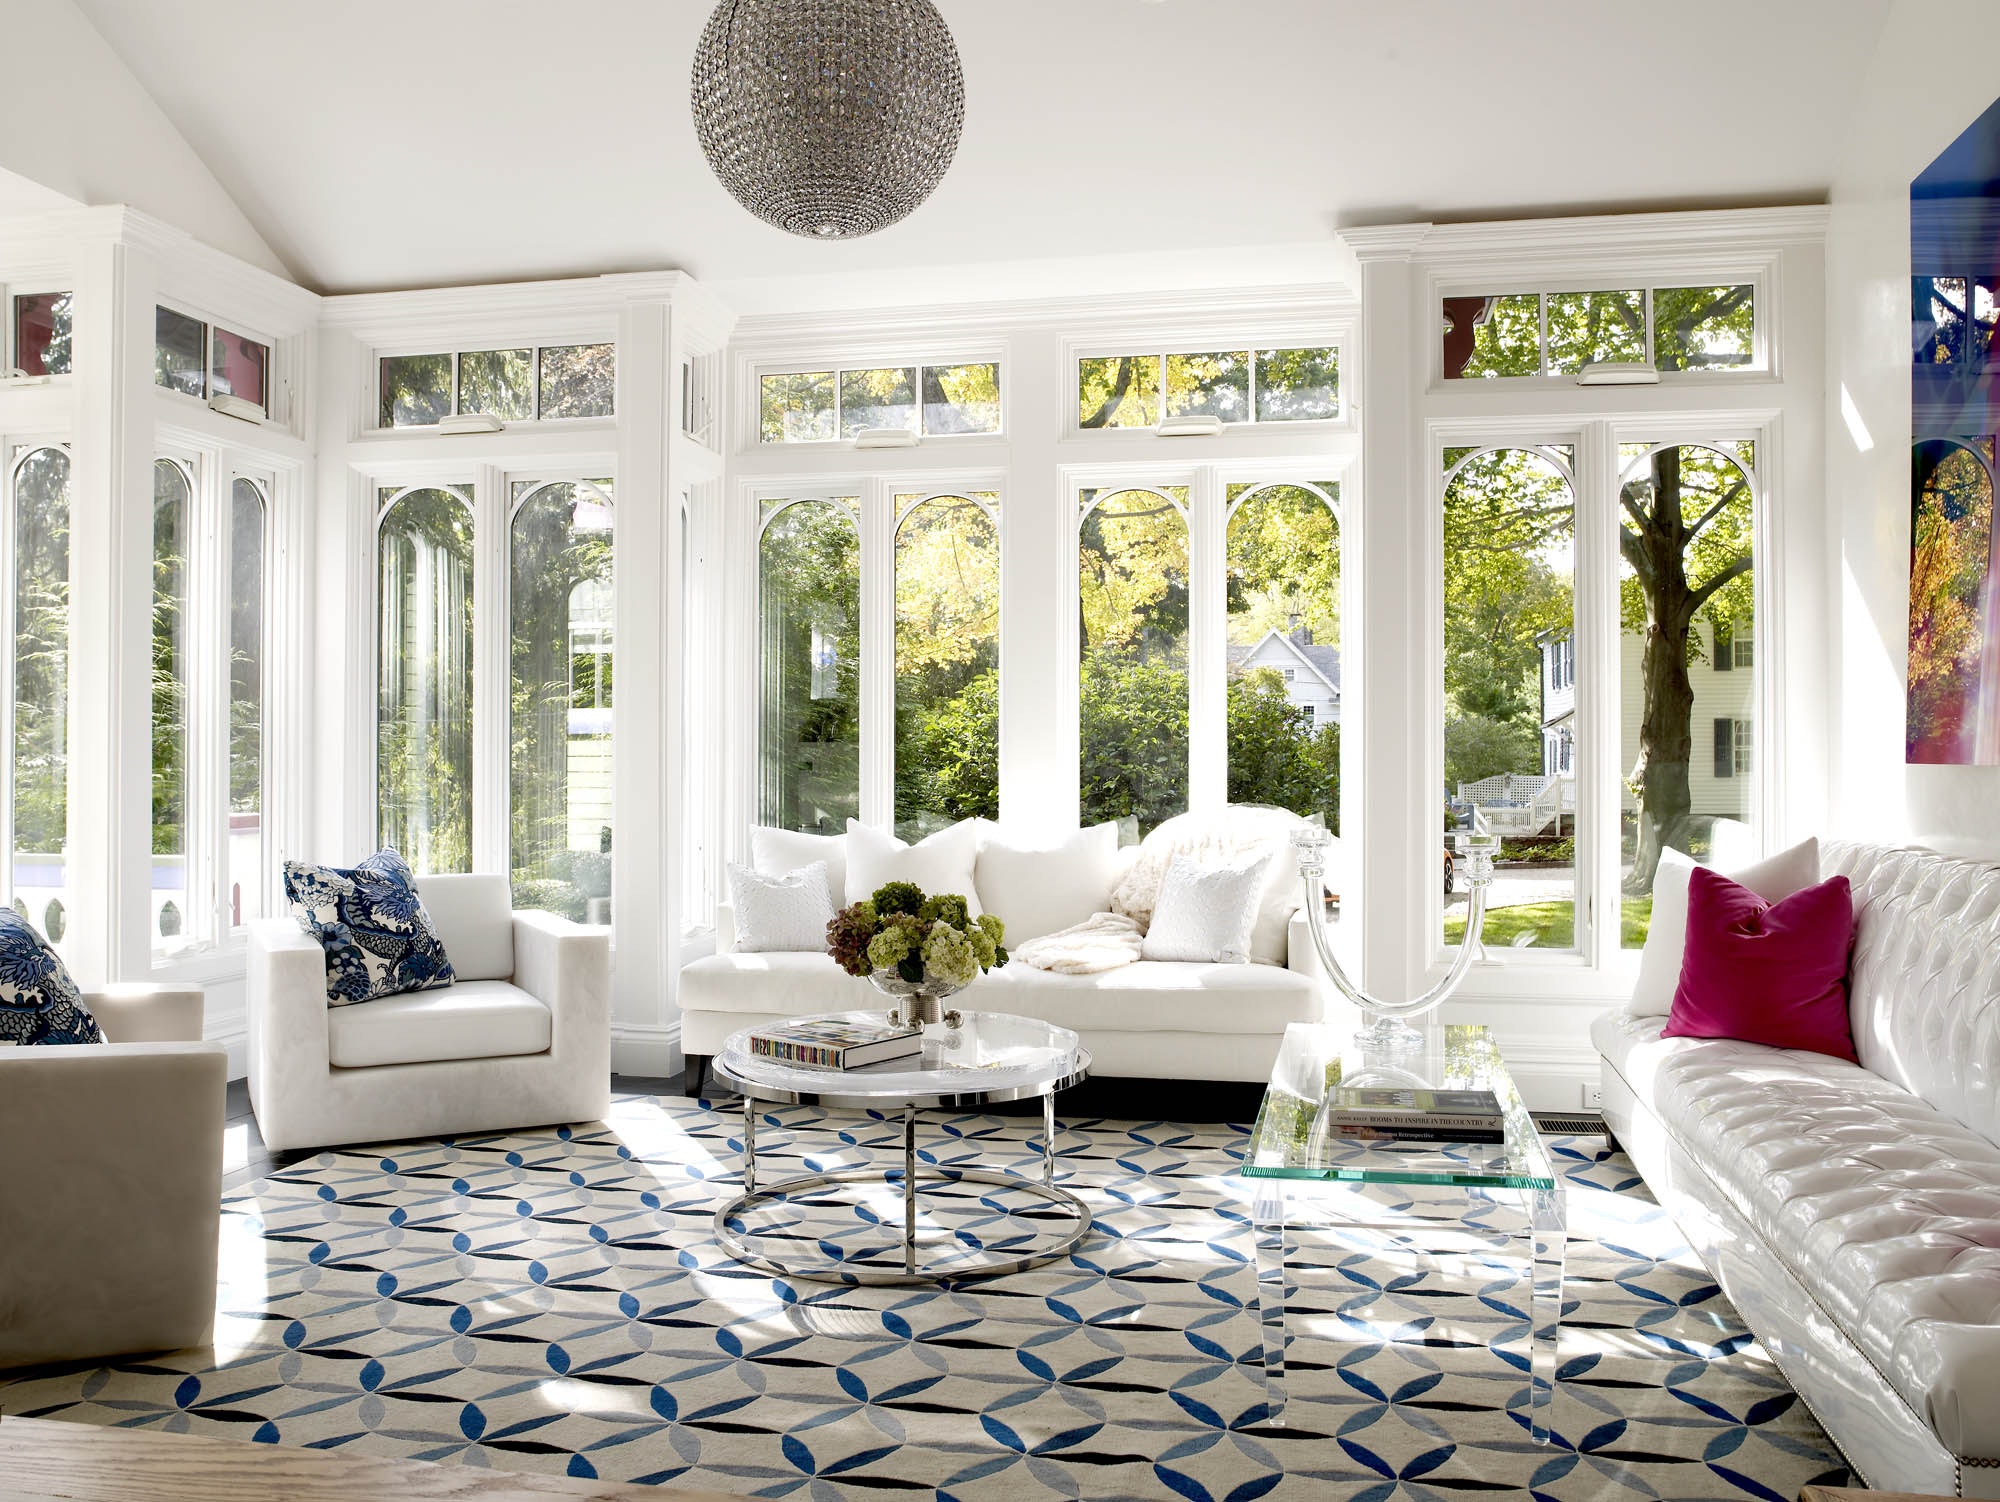 sunroom with a funky fun design disco ball glass tables and white furniture colorful accents